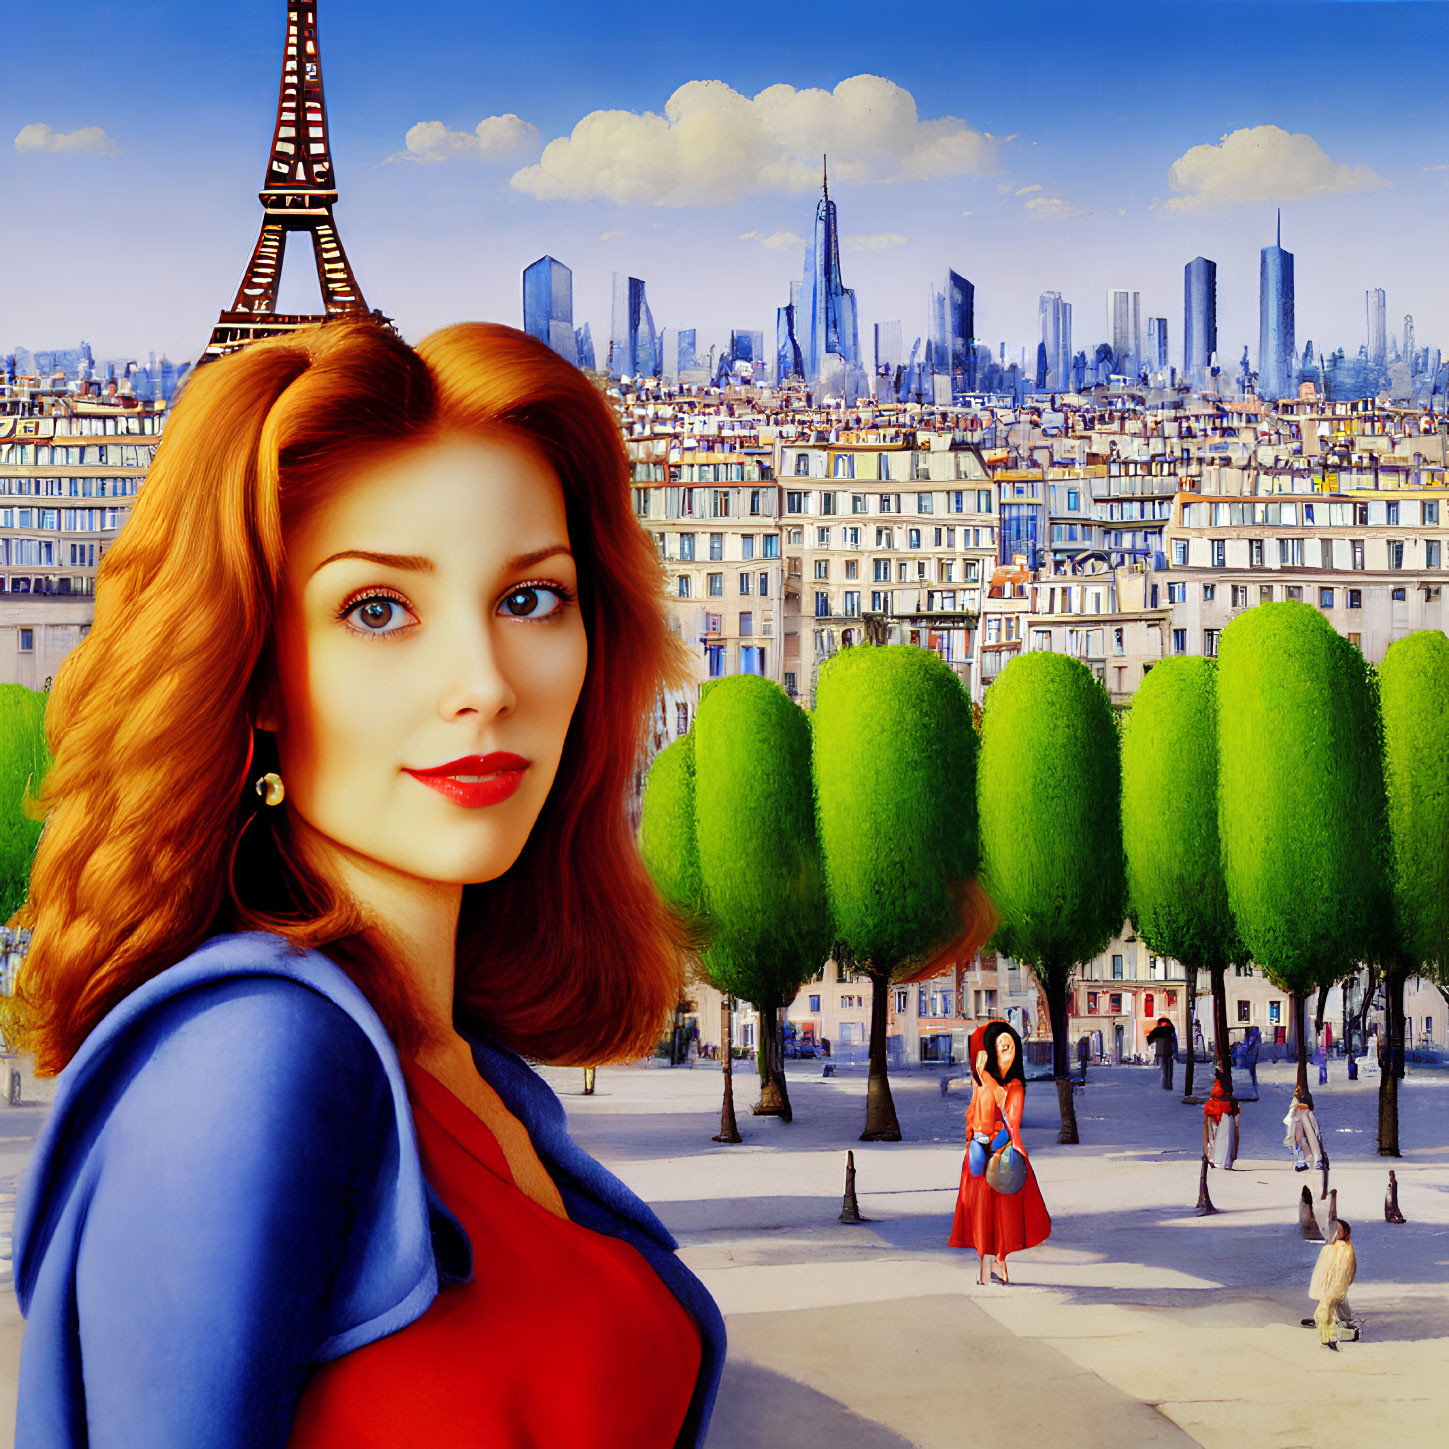 Vibrant Paris Scene with Animated Woman and Eiffel Tower